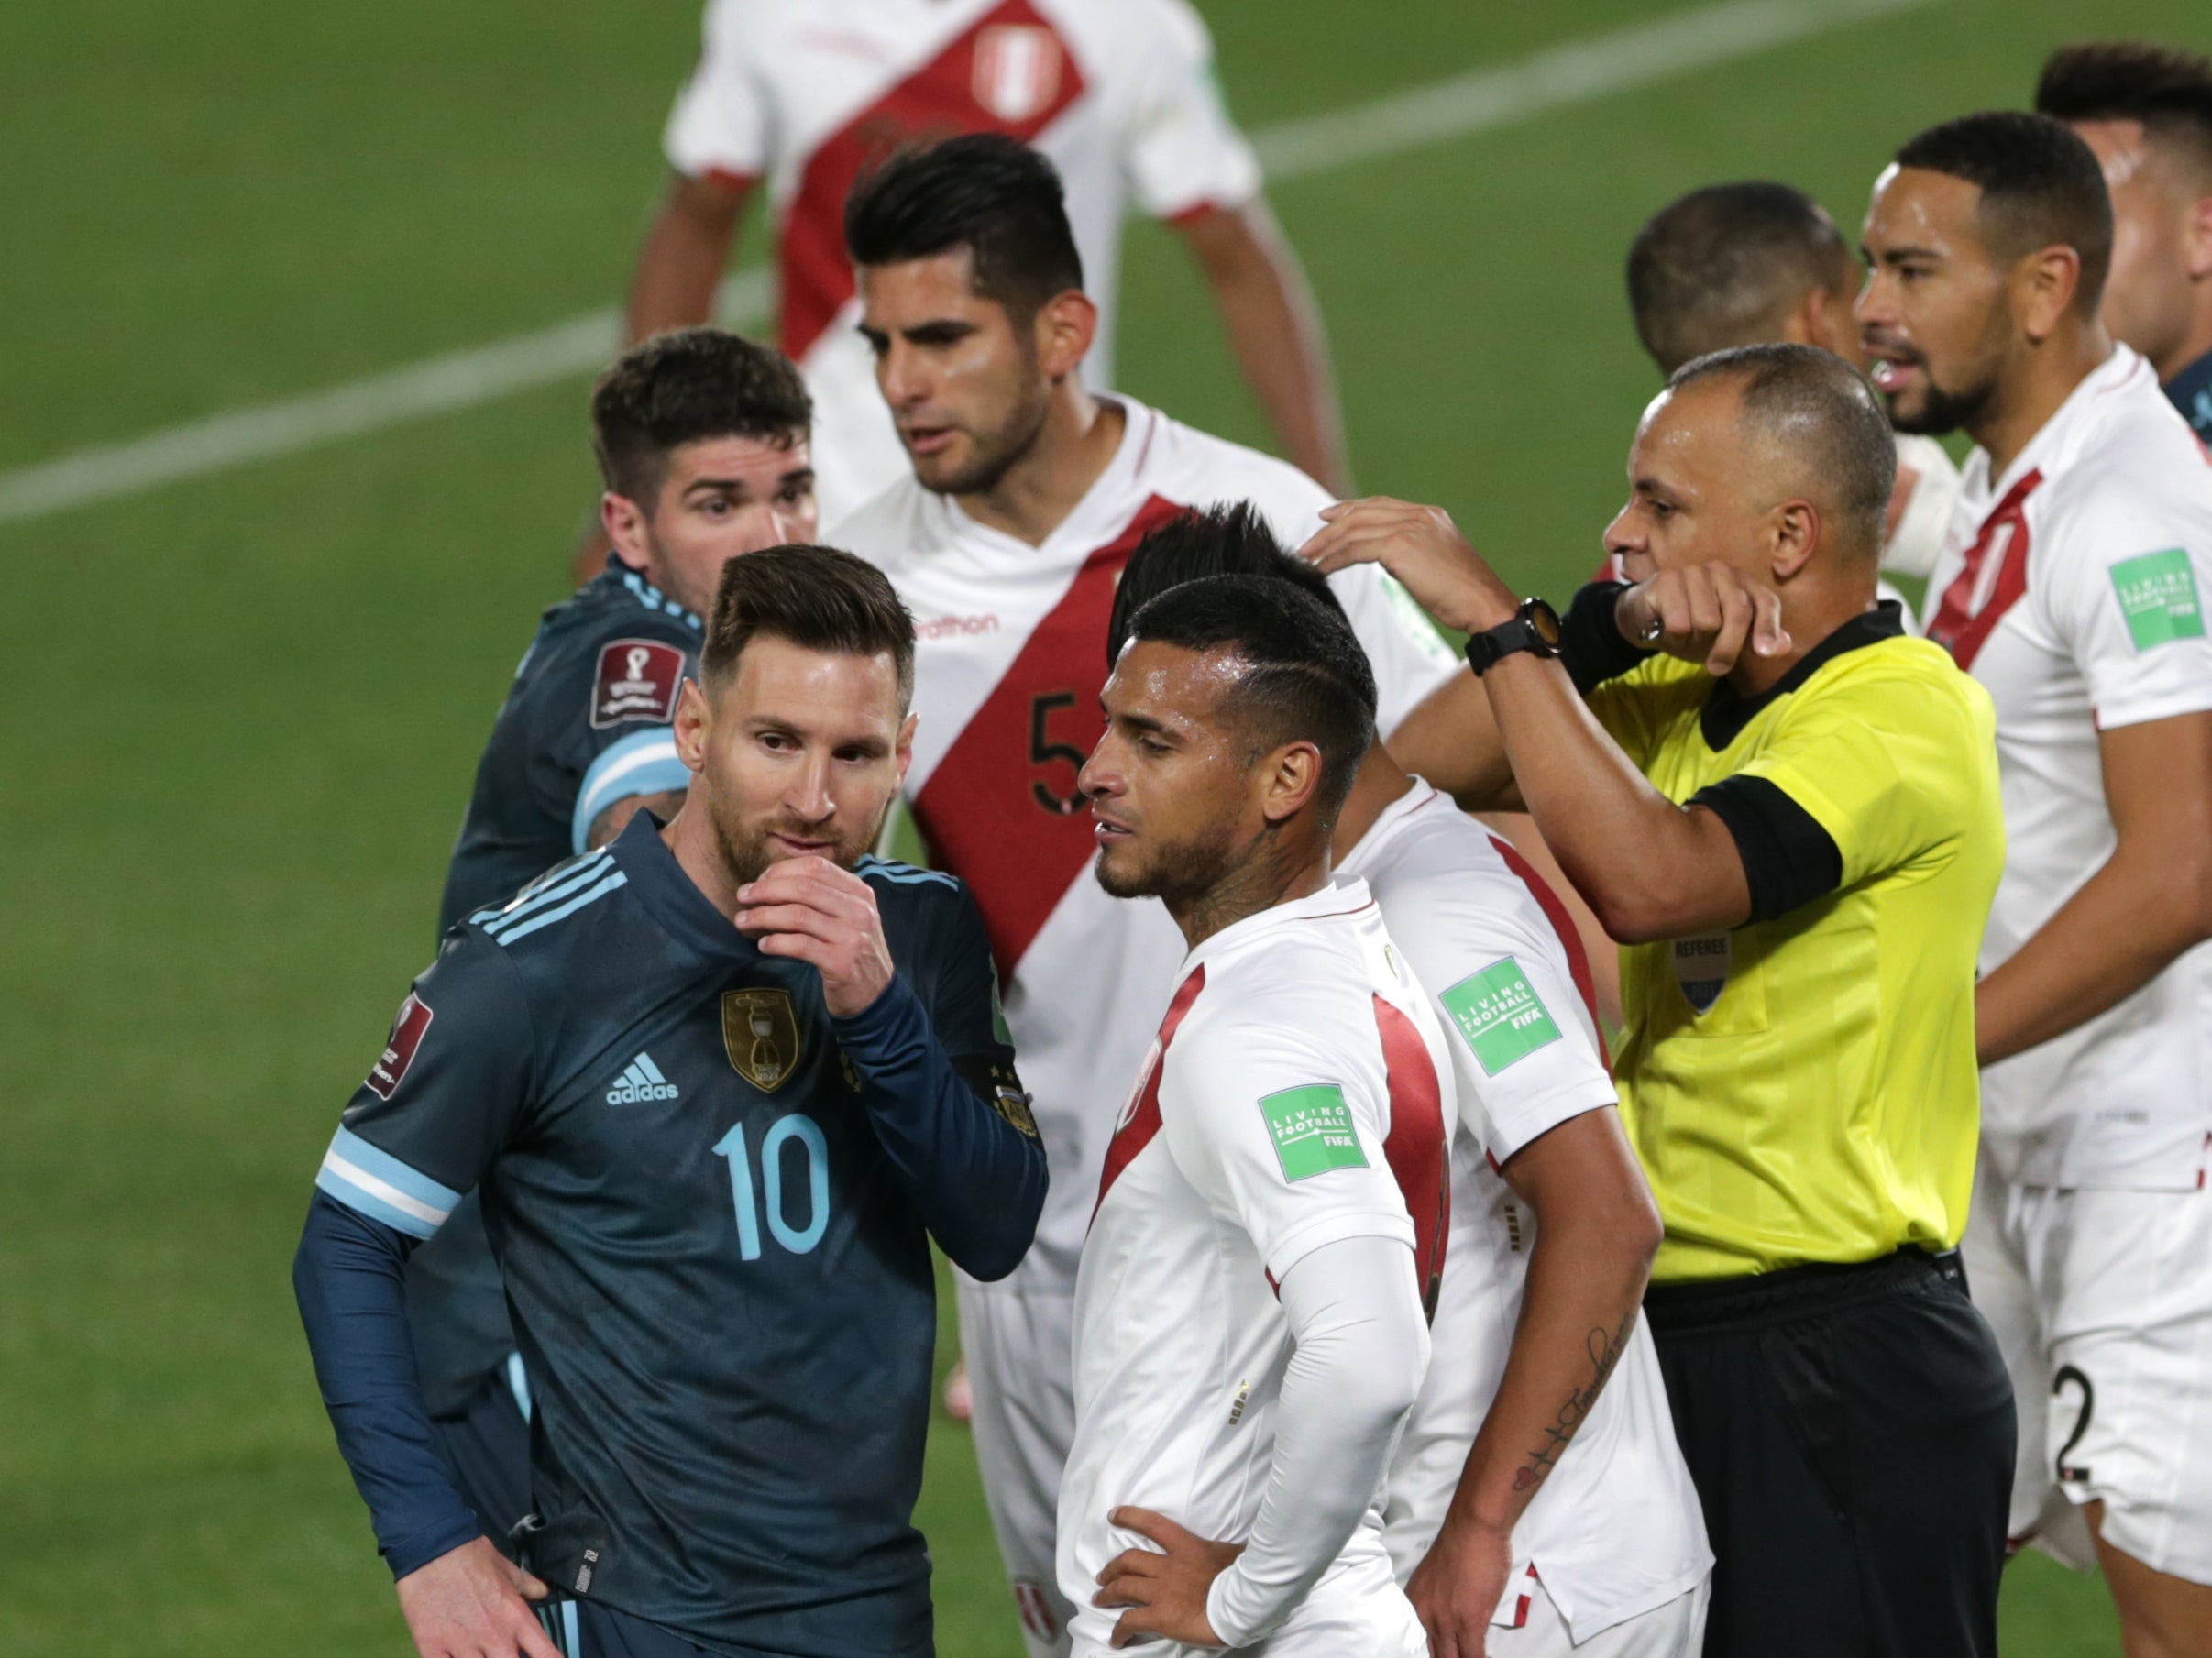 Lionel Messi of Argentina was upset at the Brazilian official’s performance